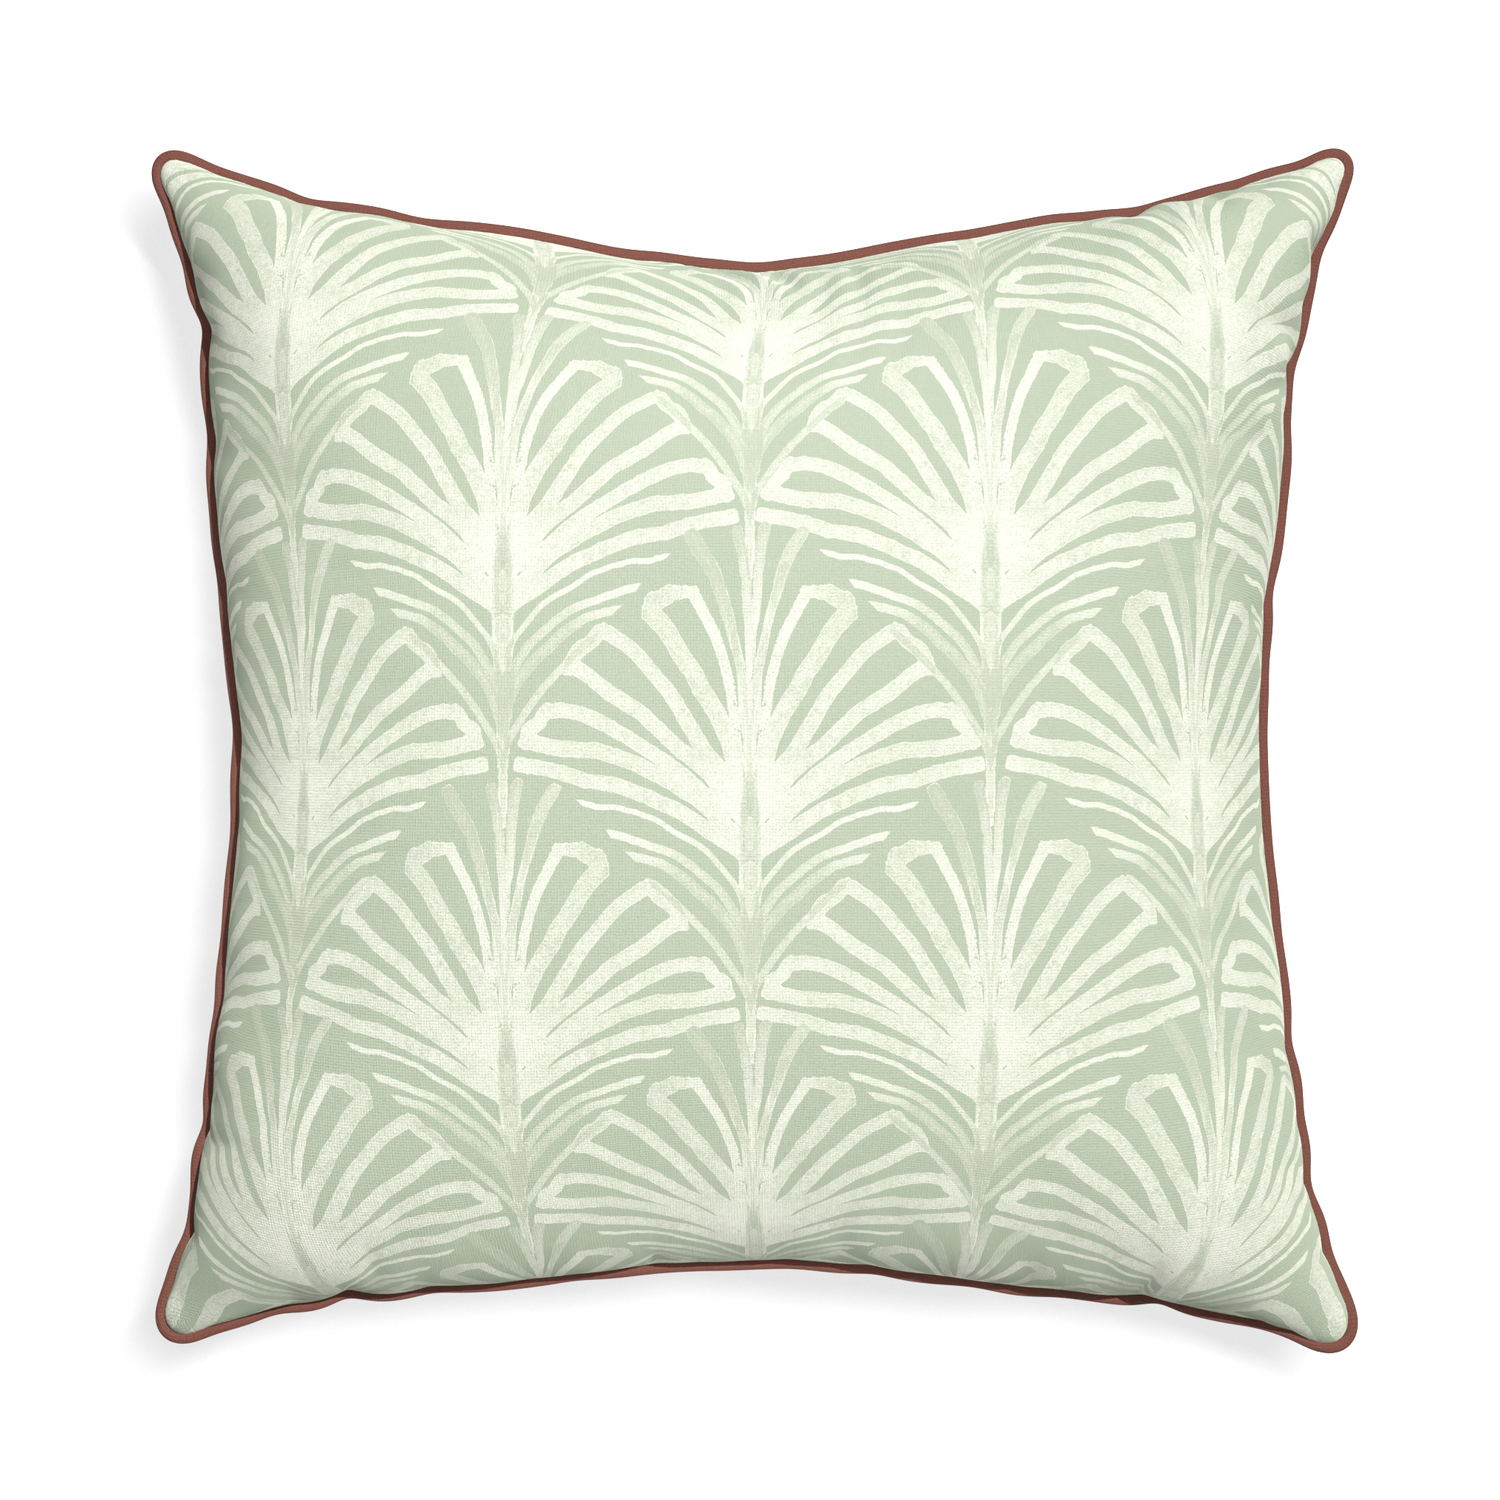 Euro-sham suzy sage custom pillow with w piping on white background